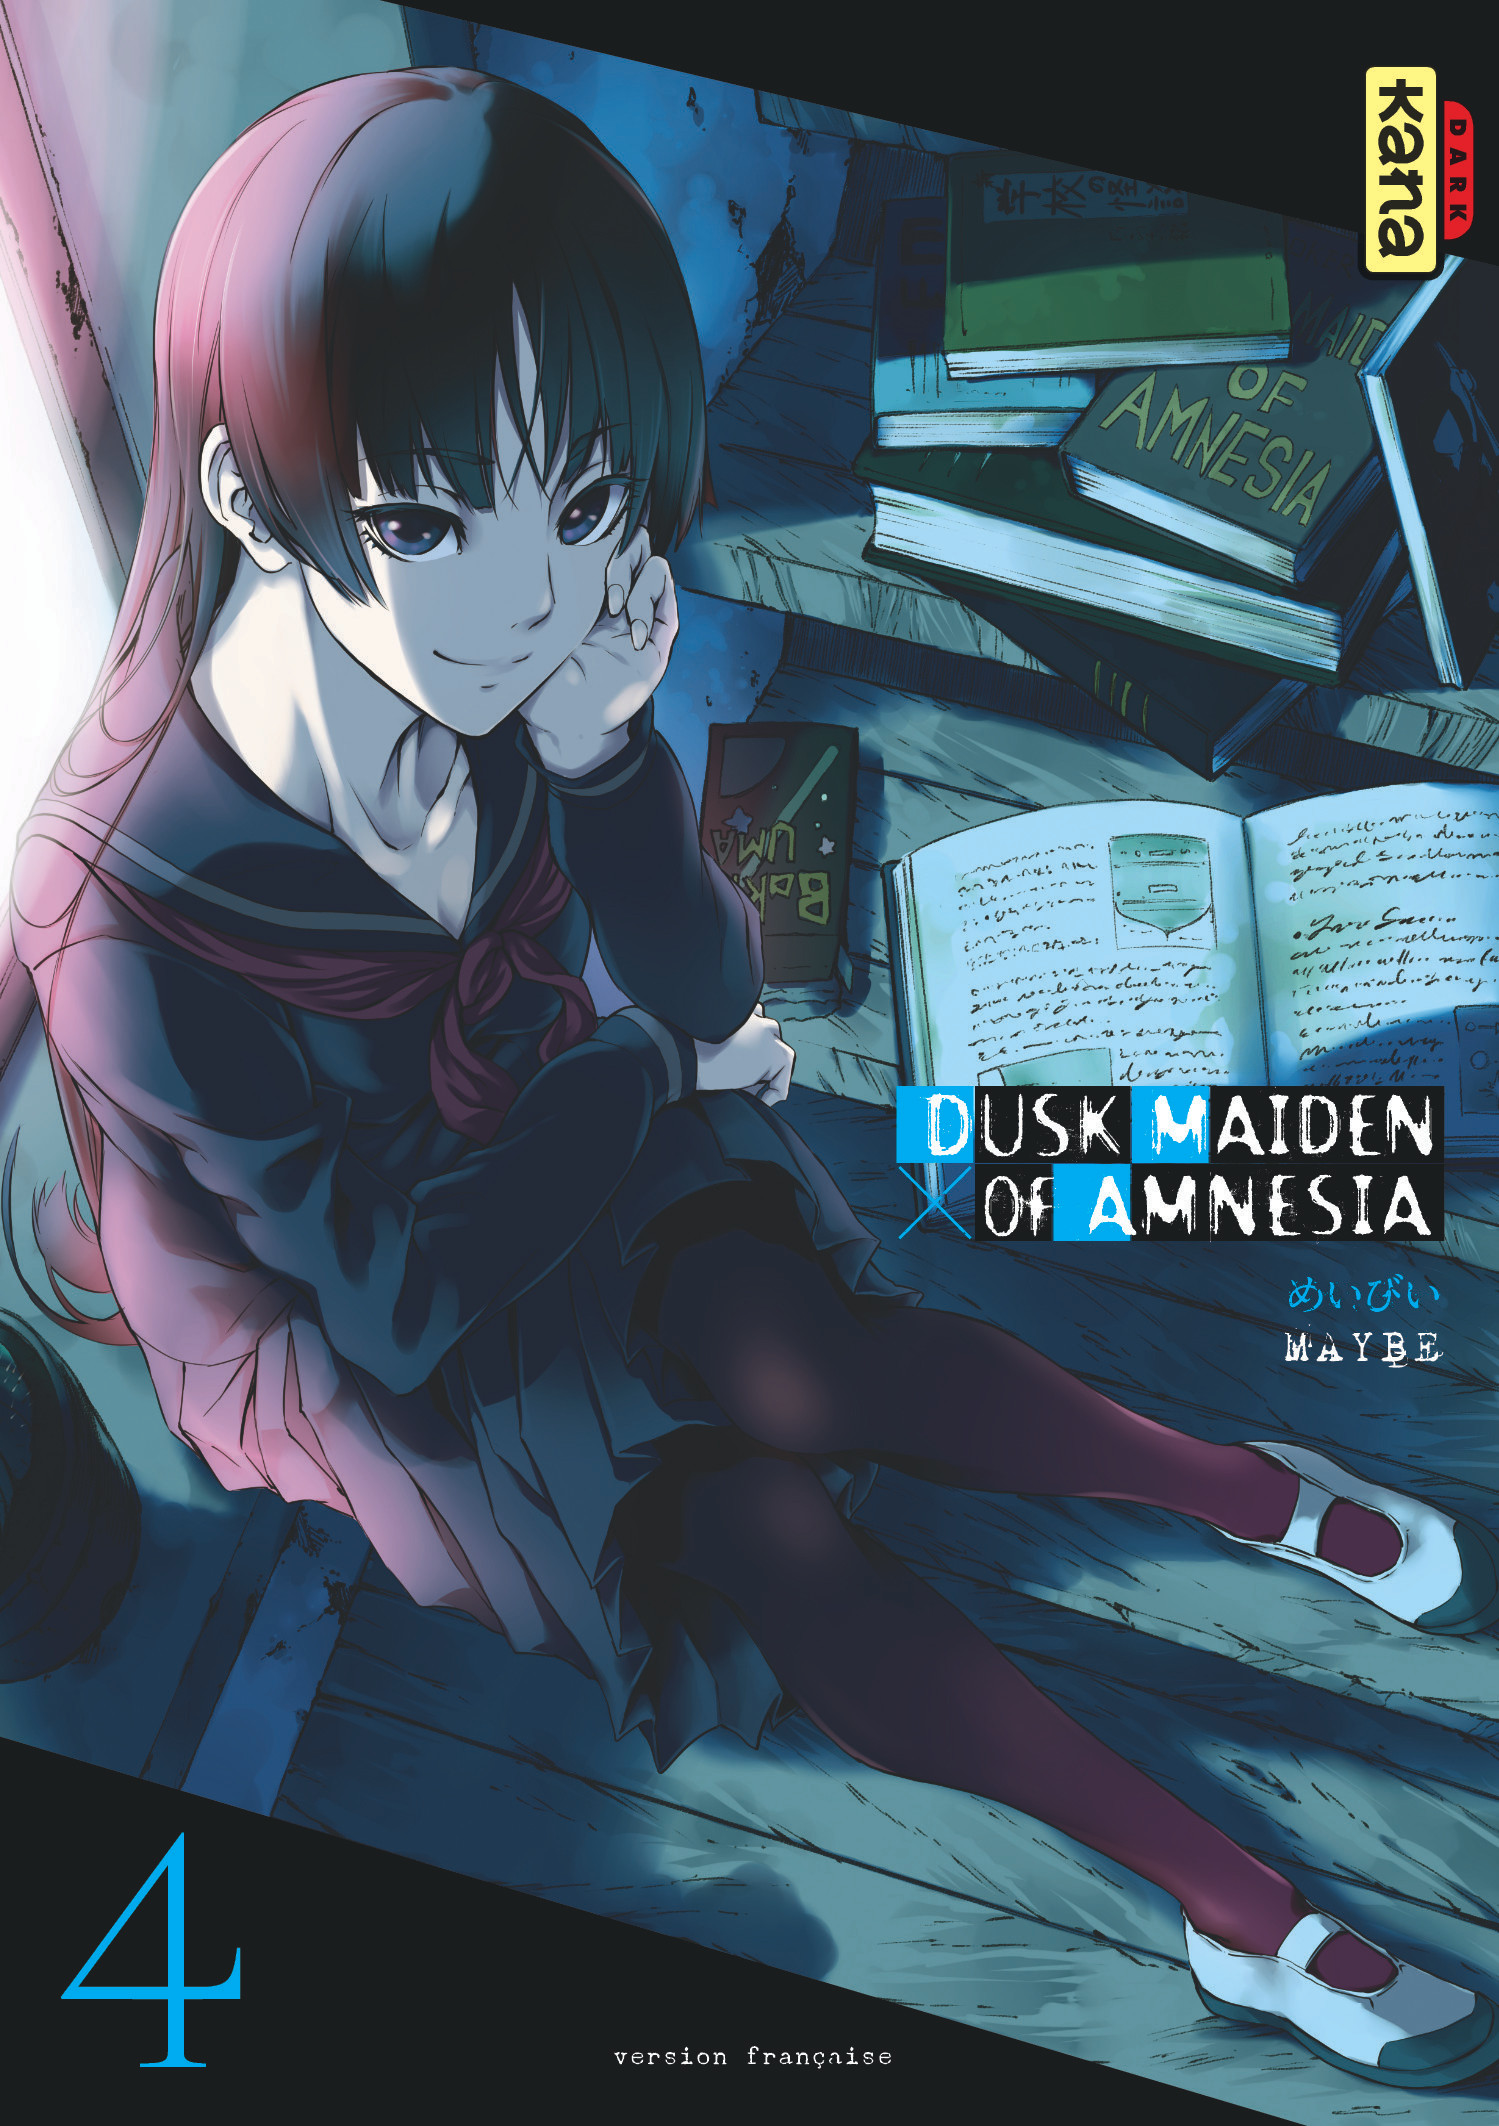 Dusk maiden of Amnesia – Tome 4 - couv